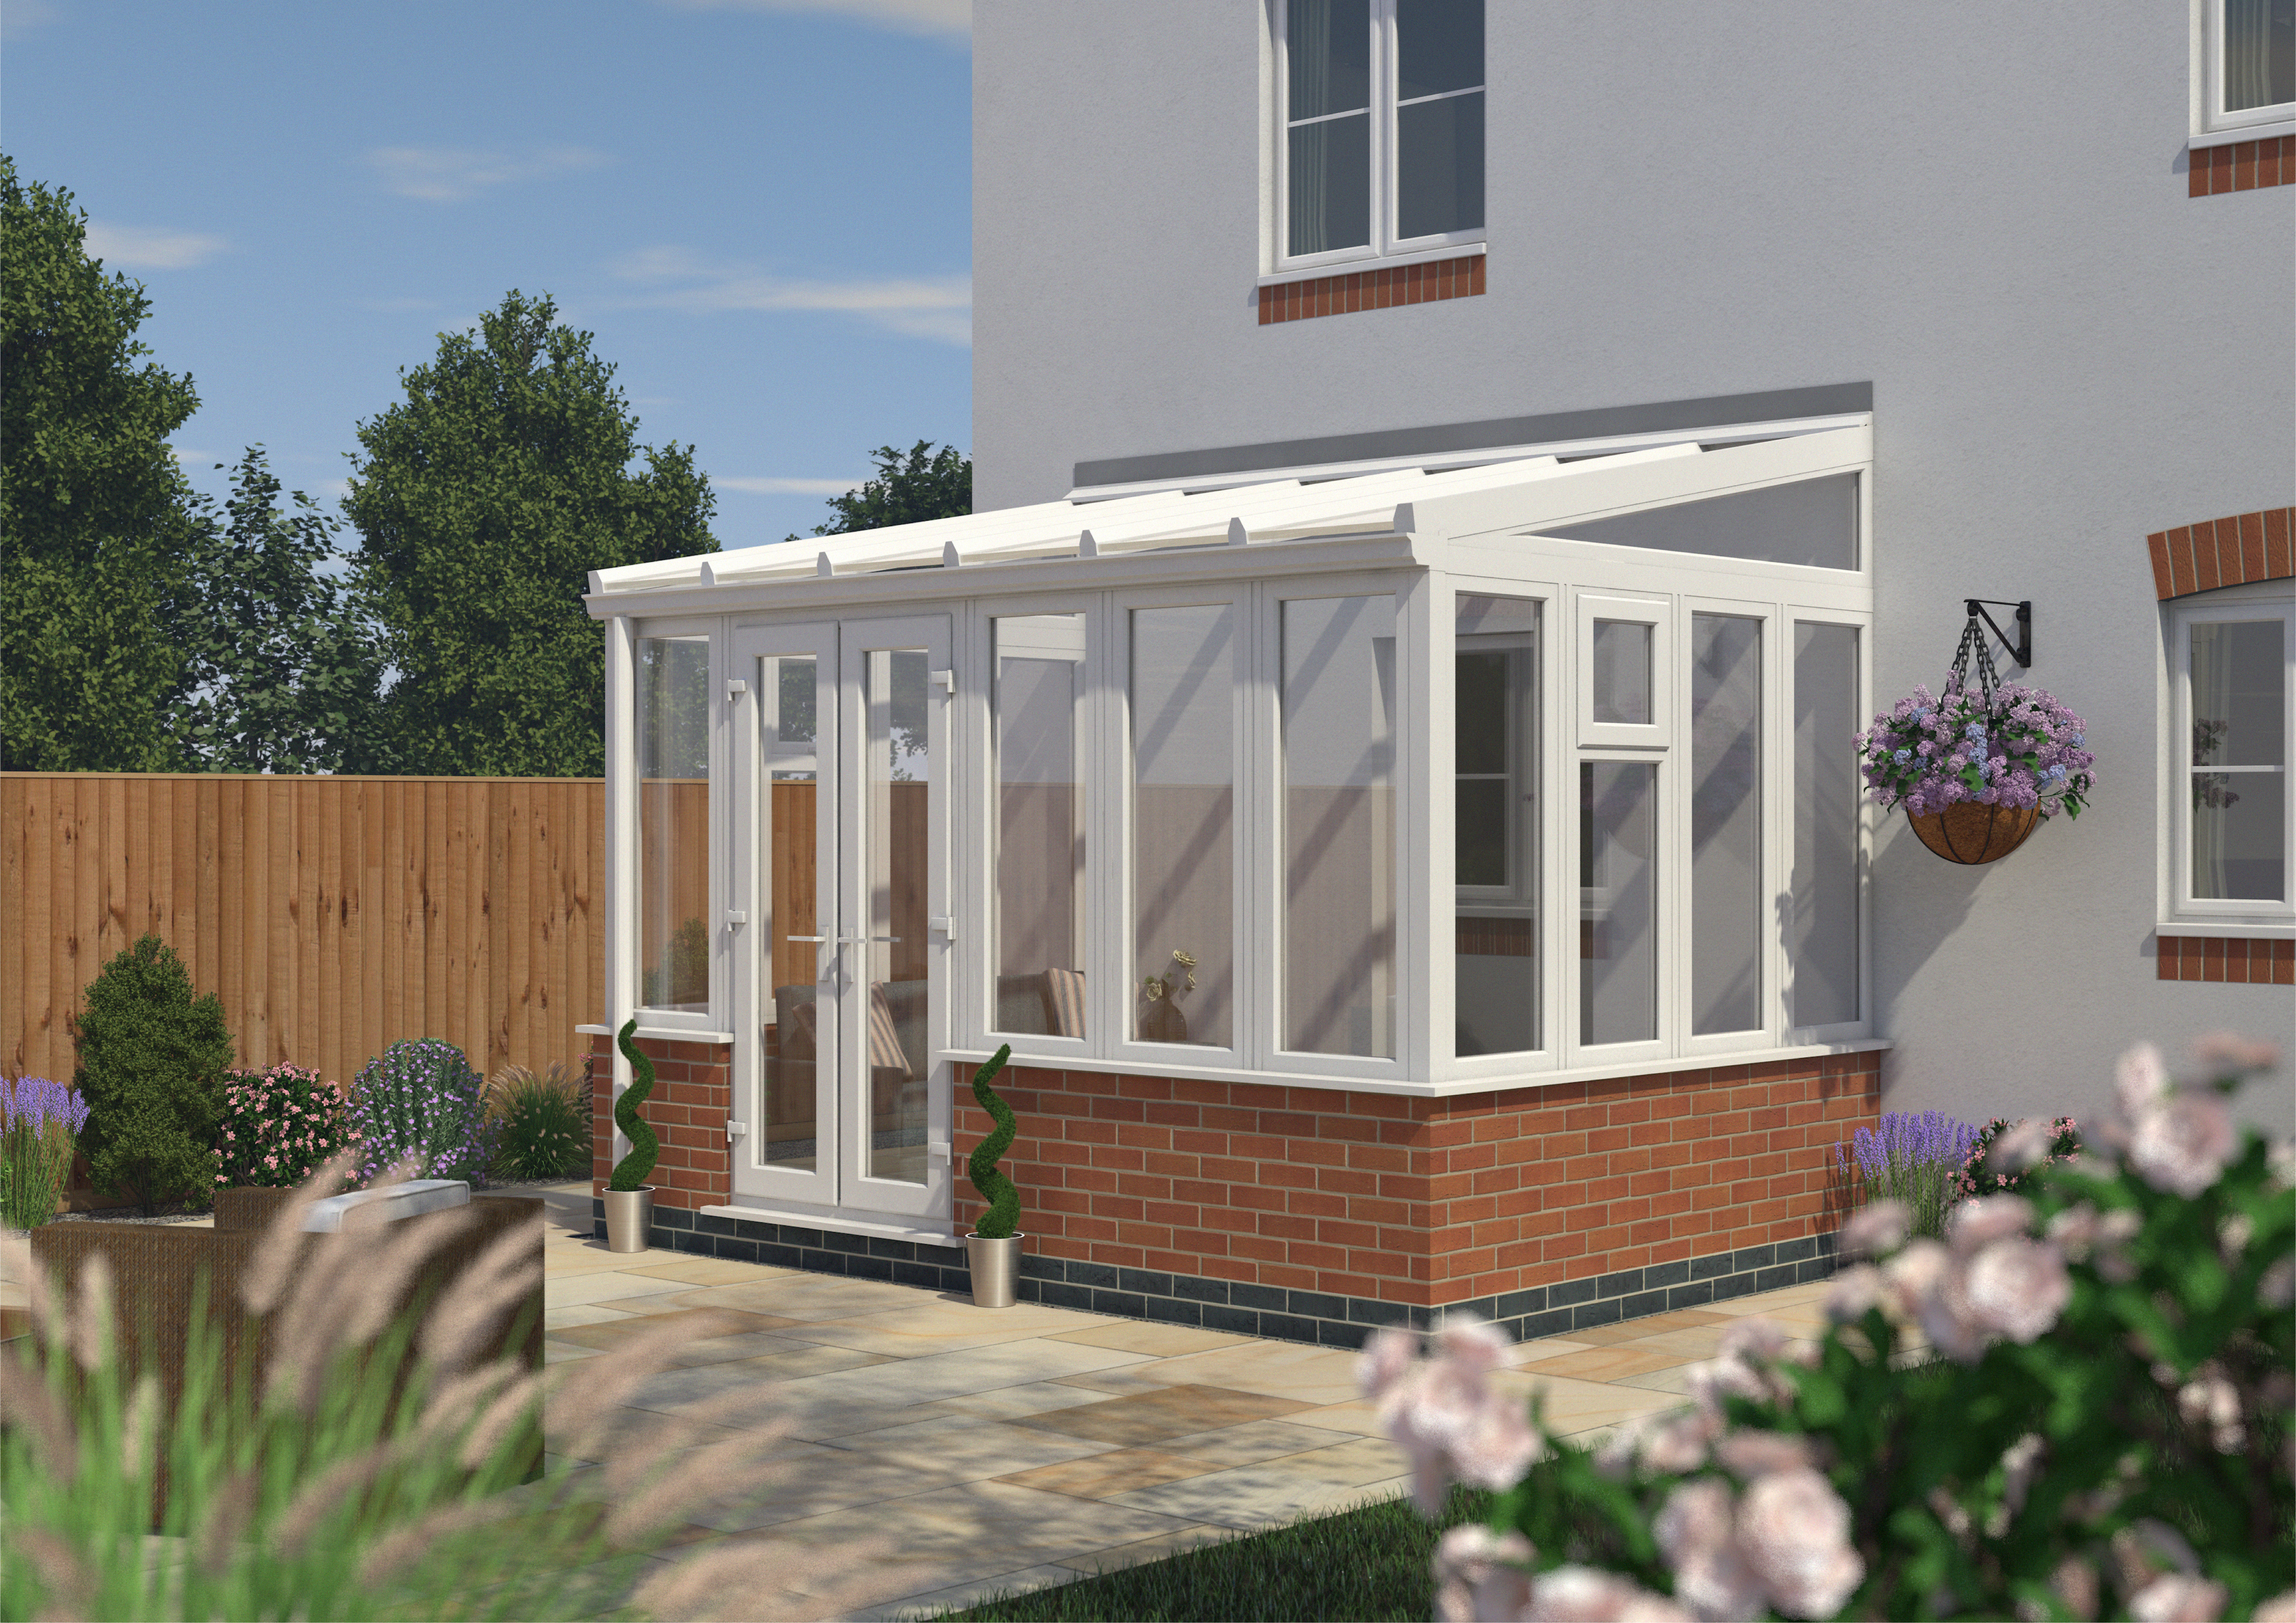 Image of Euramax Lean To Conservatory Dwarf Wall - White - 12 ft x 8ft